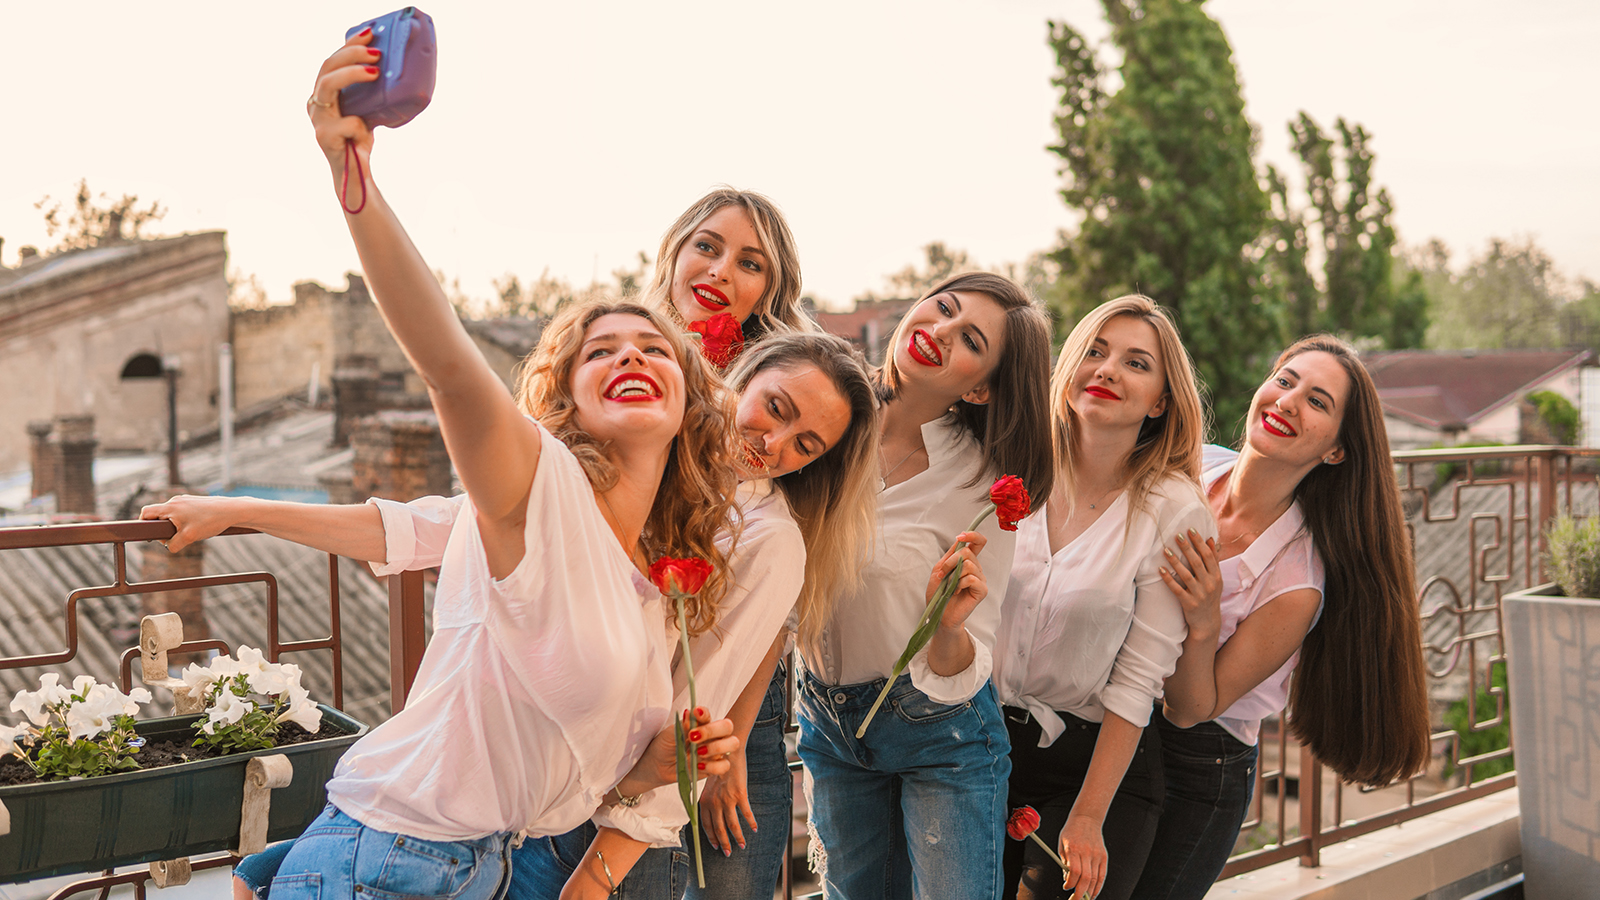 Girls Party. Beautiful Women Friends on the balcony or roof taking selfie with flowers At Bachelorette Party. They wear same clothes